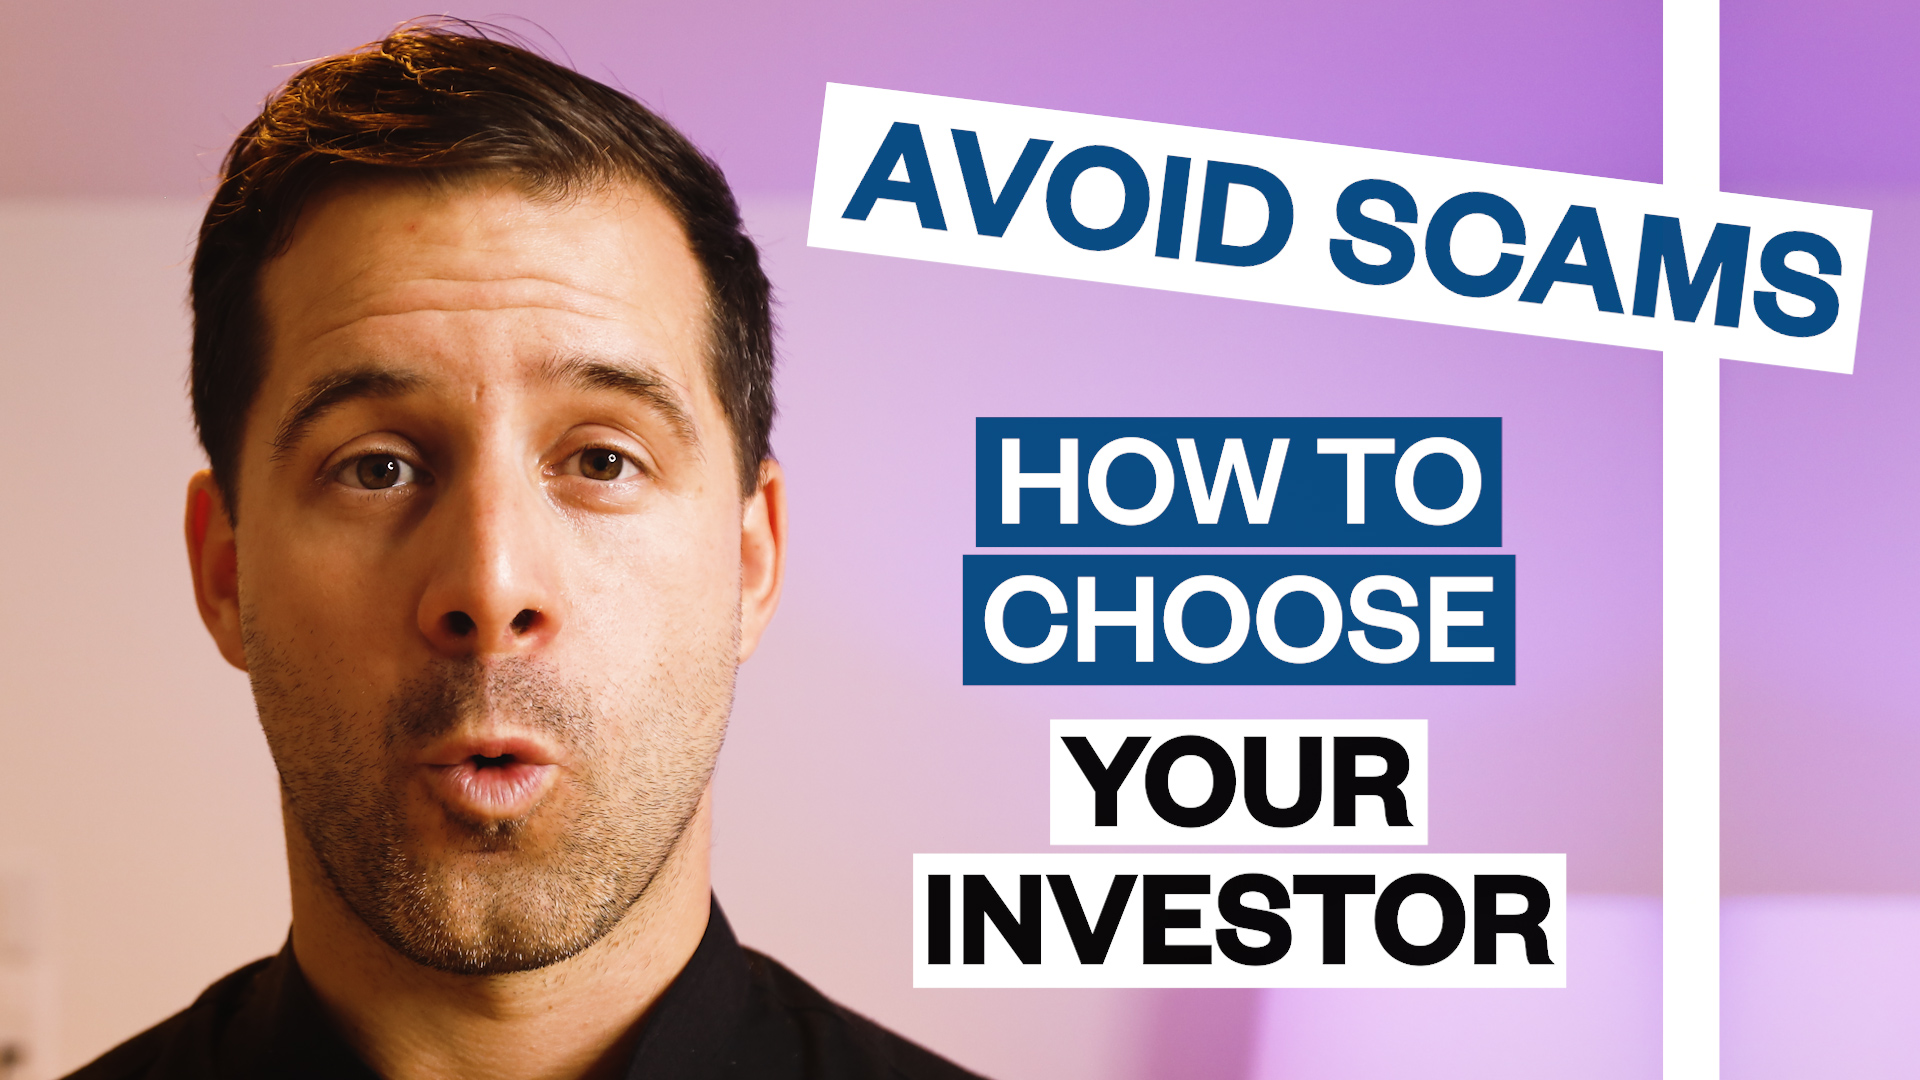 Avoid scams: How to choose your investor?